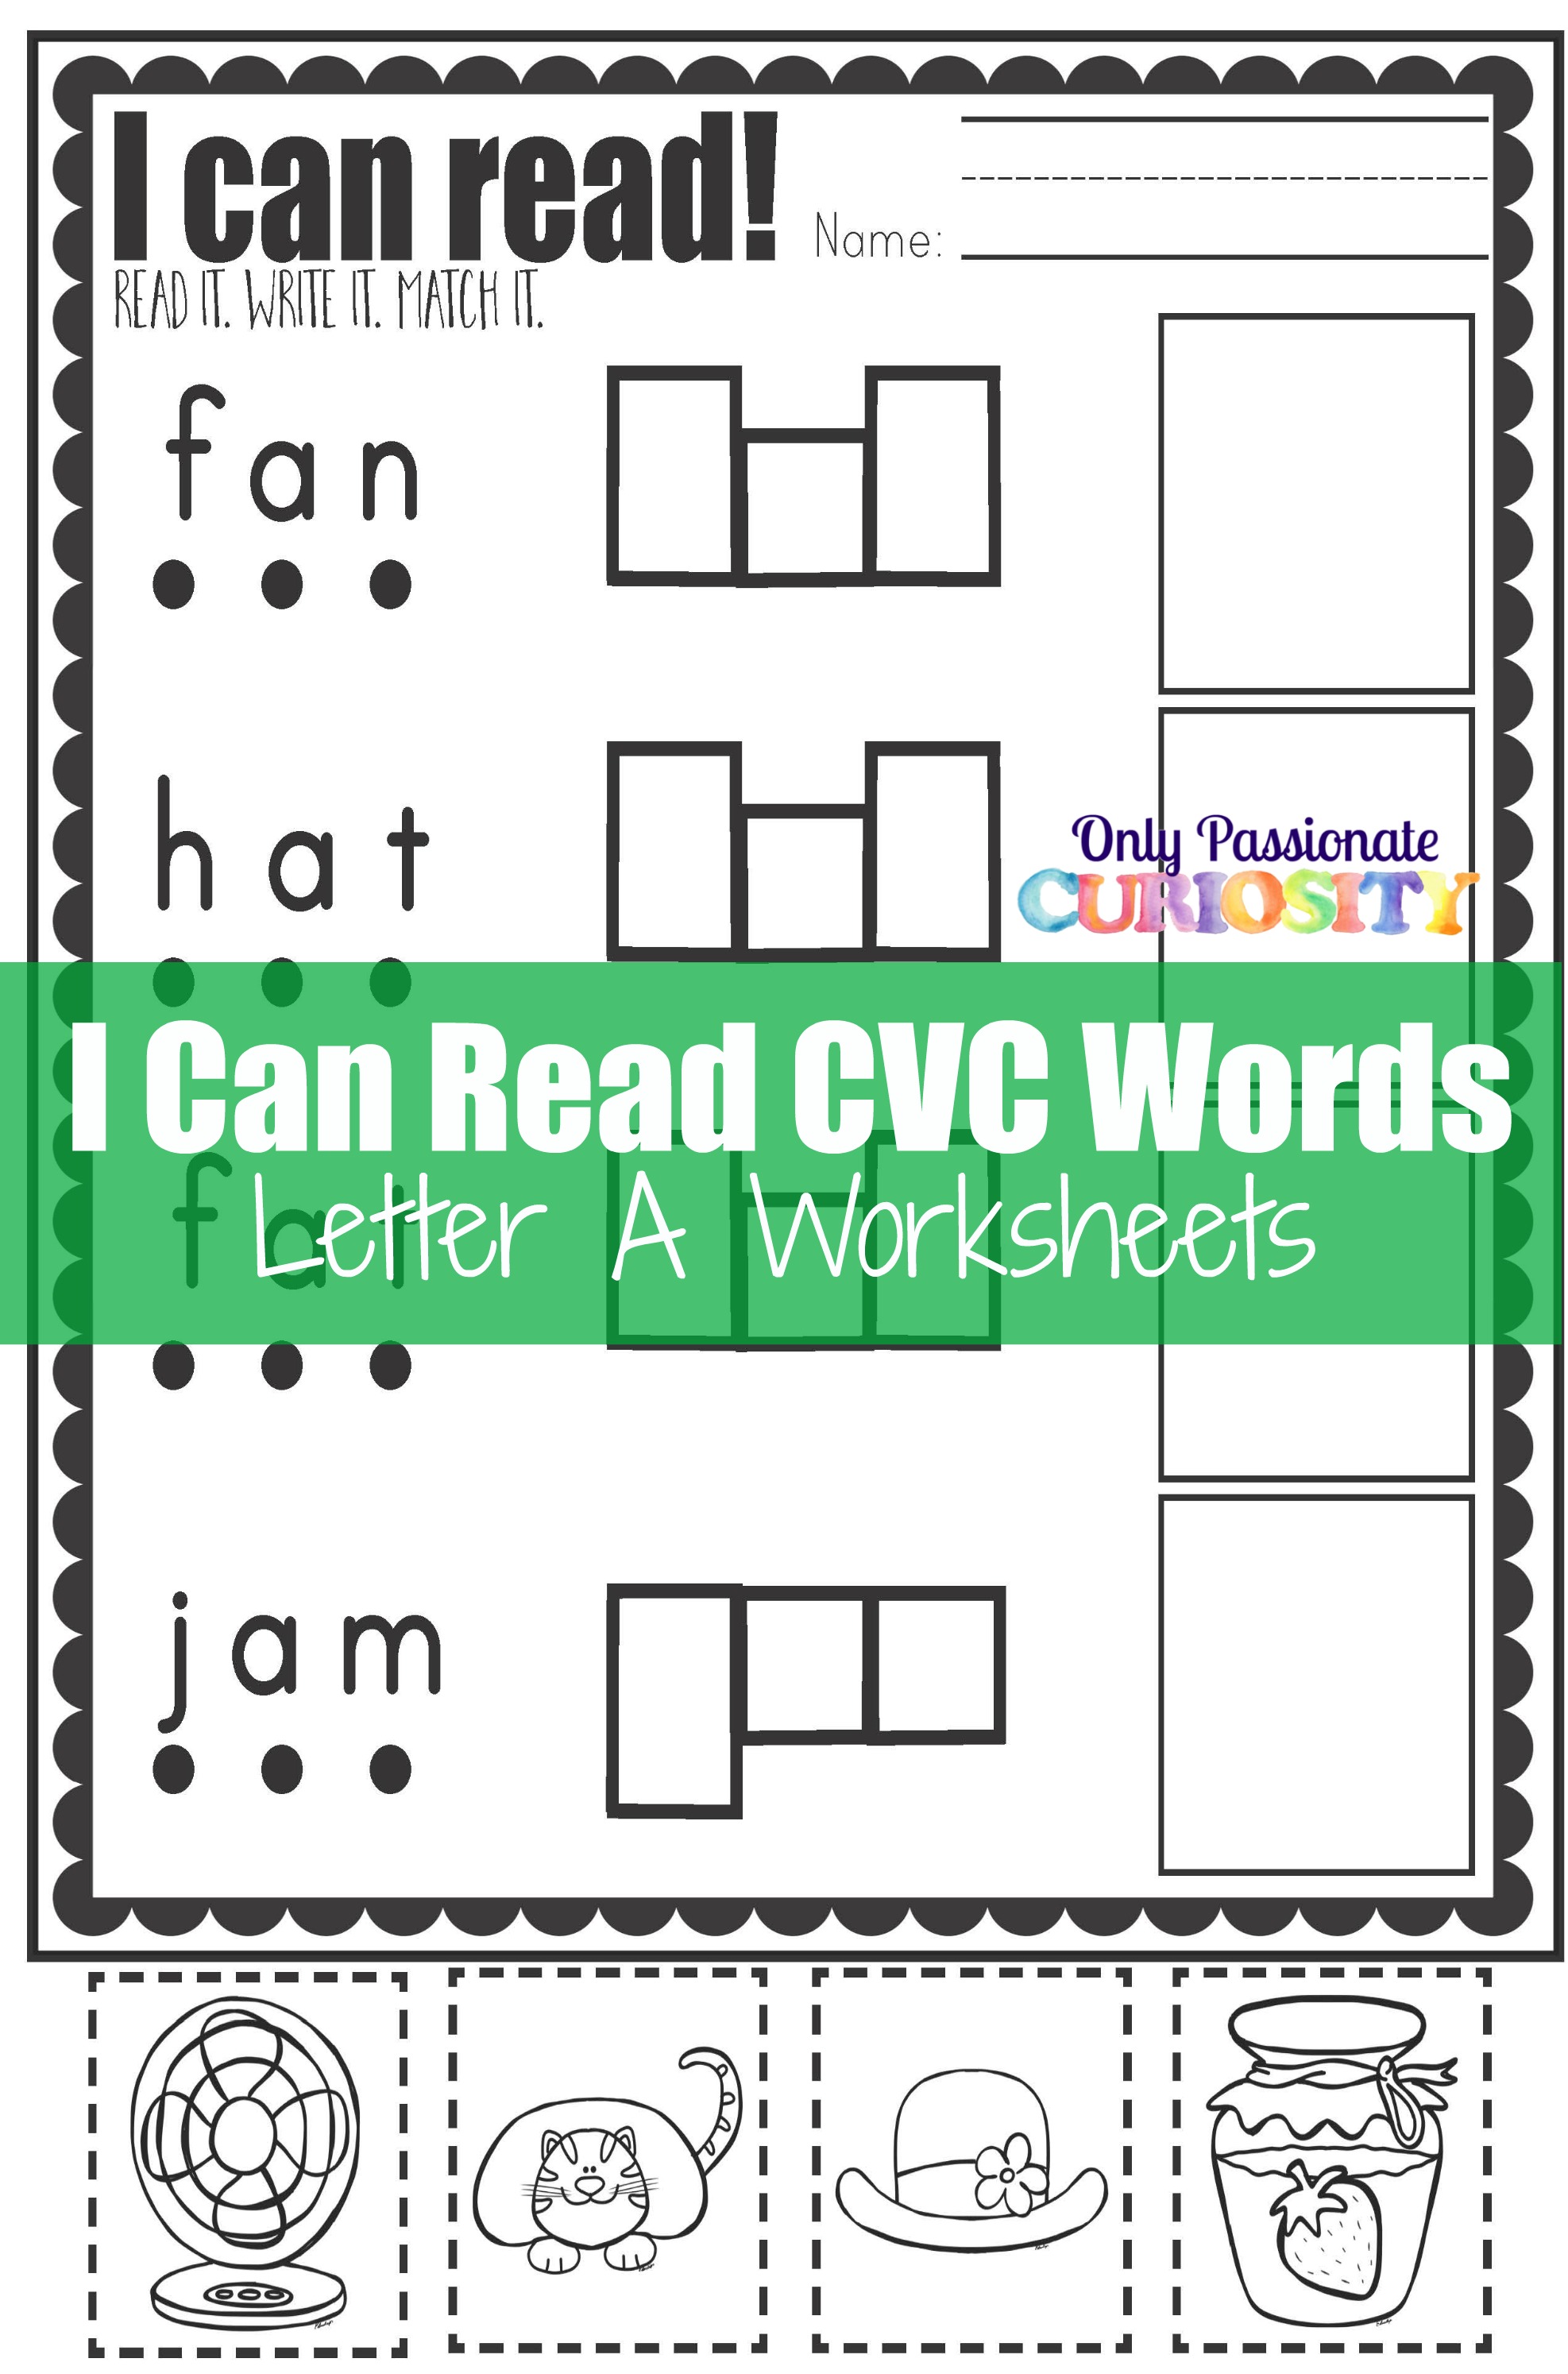 cvc-worksheets-cut-and-paste-letter-a-only-passionate-curiosity